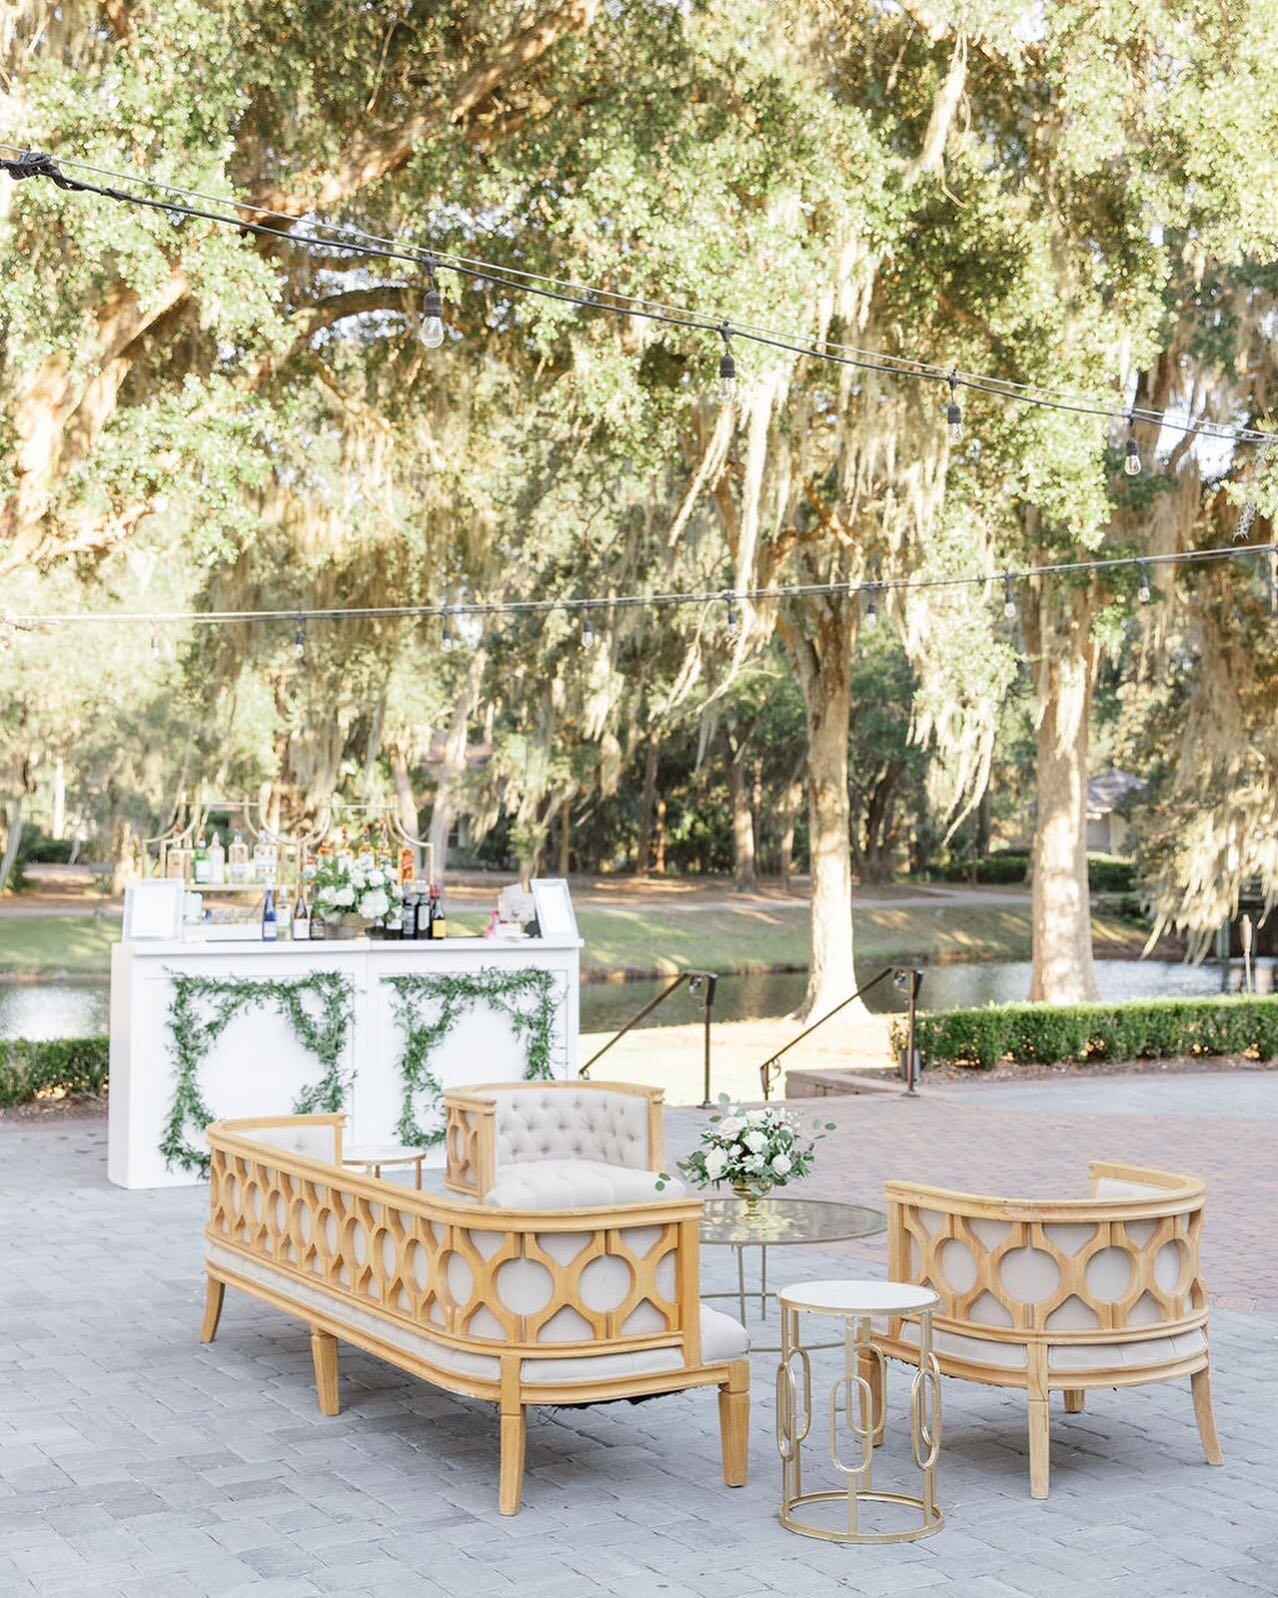 Forever one of our favorite cocktail hour spaces ✨

Photography: @clayaustin 
Florist: @harveydesigns_savannah 
Rentals: @crushbyeventworks 
Venue: @landingsclub 

#cocktailhour #savannahga #savannahwedding #savannahweddings #savannahweddingplanner #